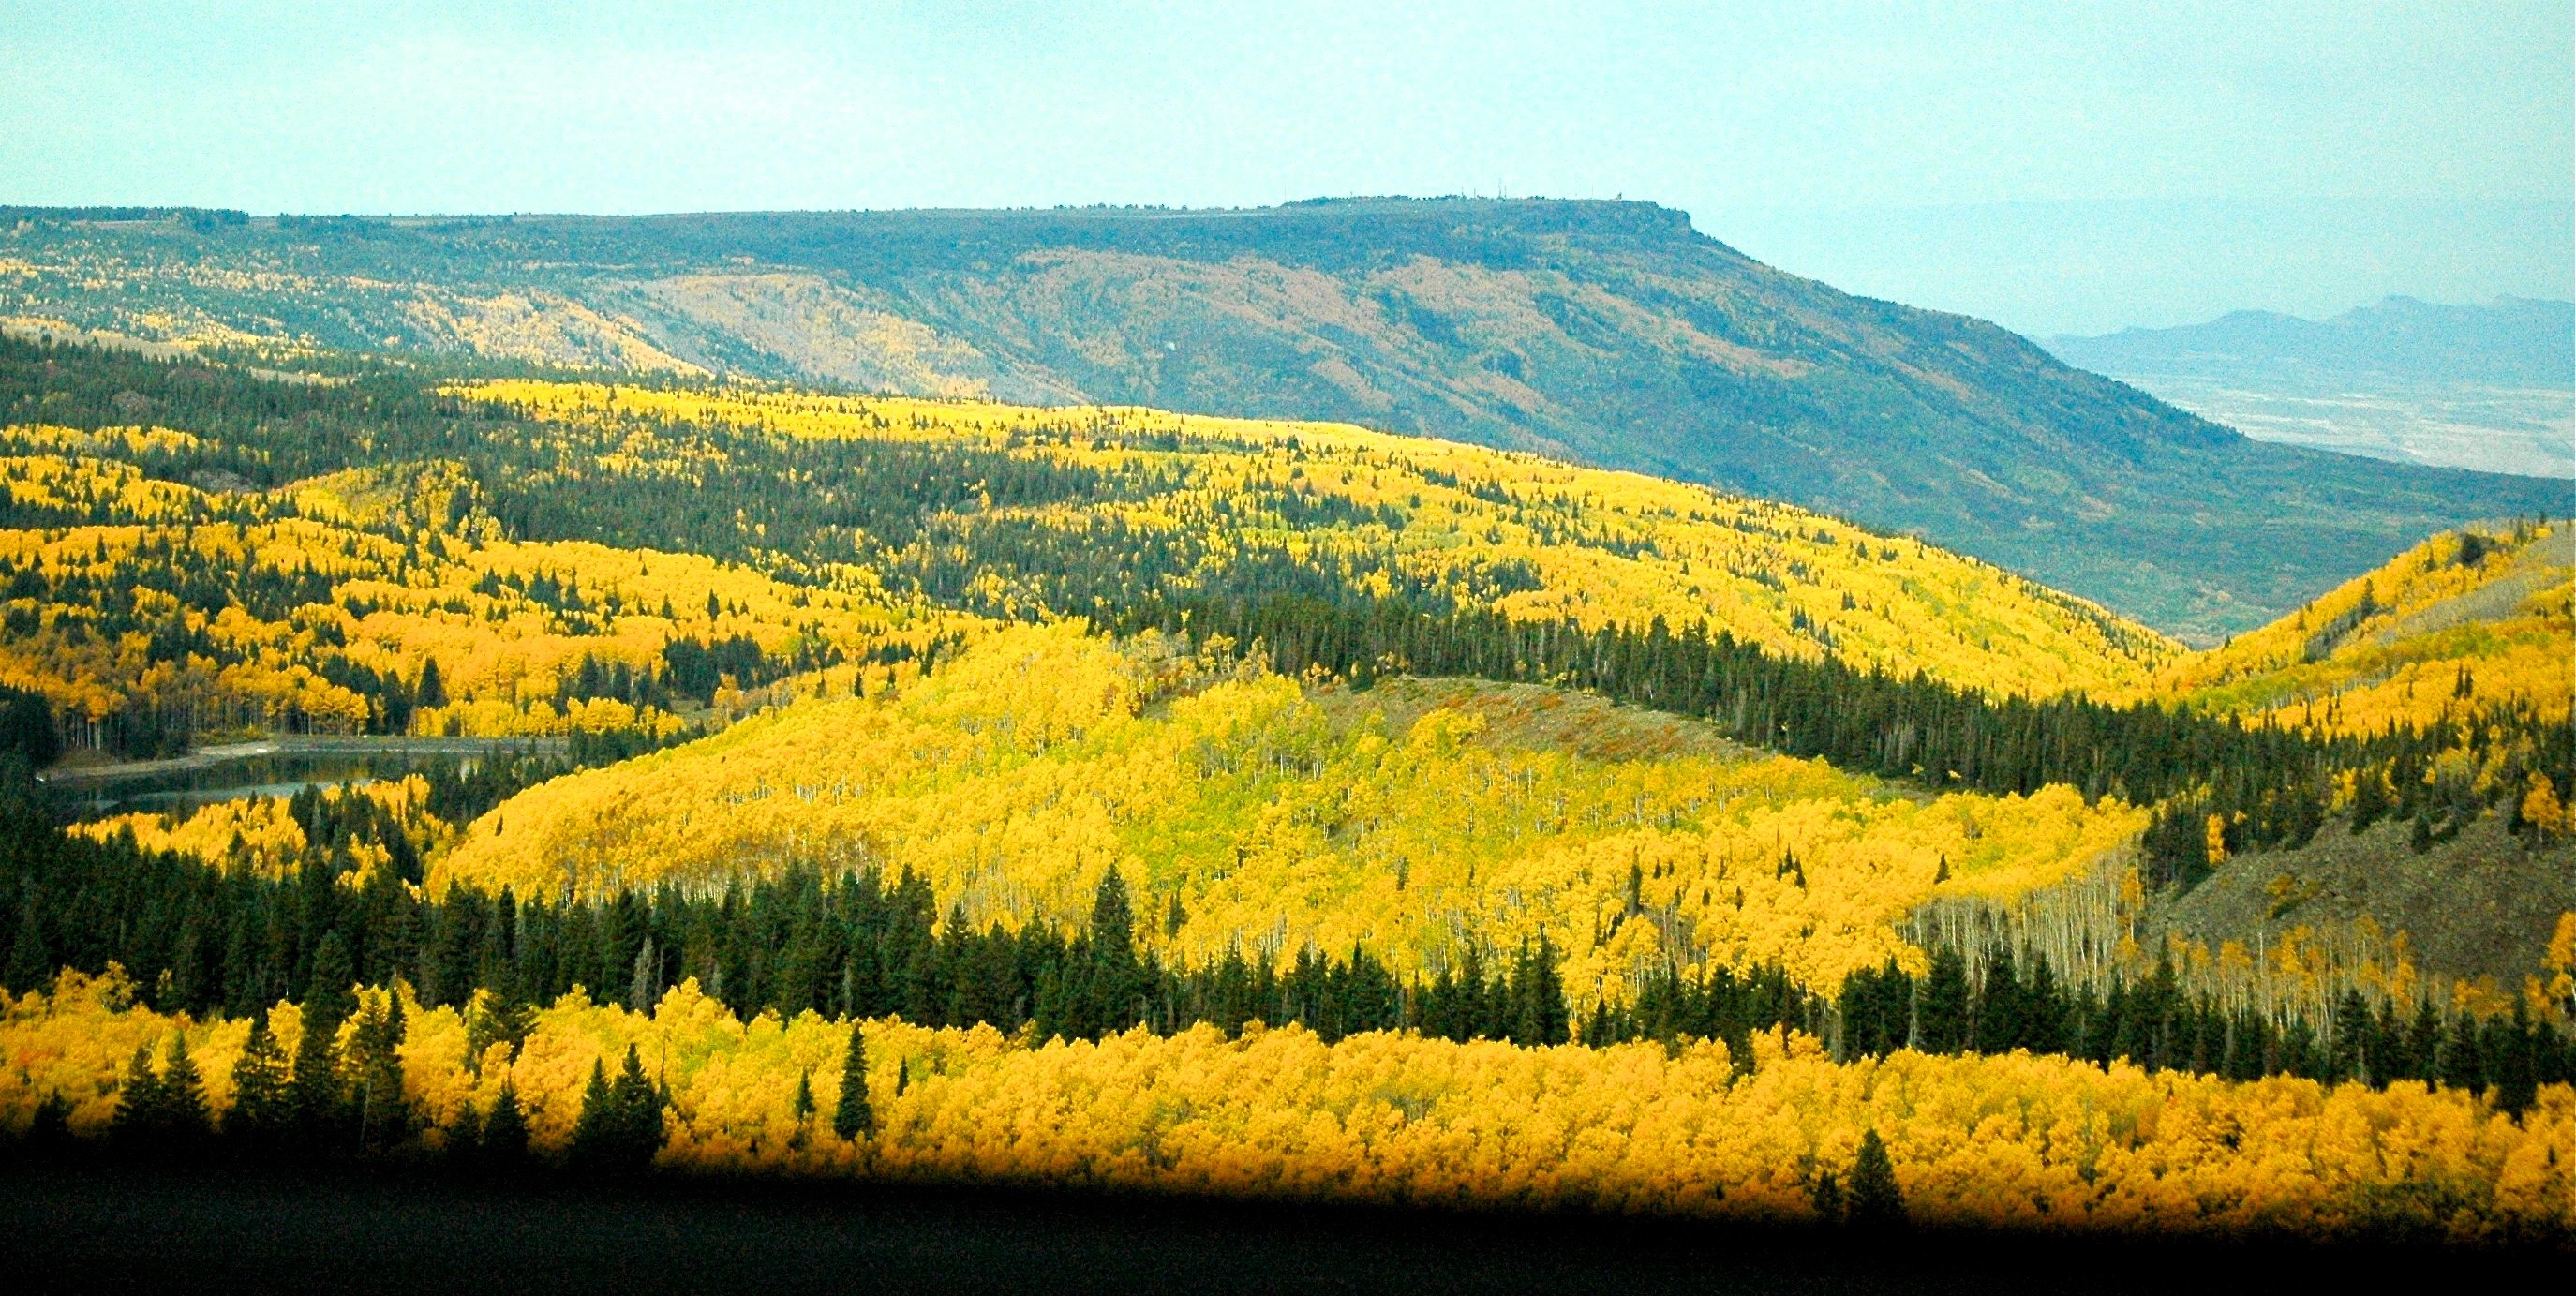 Golden swaths of Aspens decorate the western slopes of Colorado.